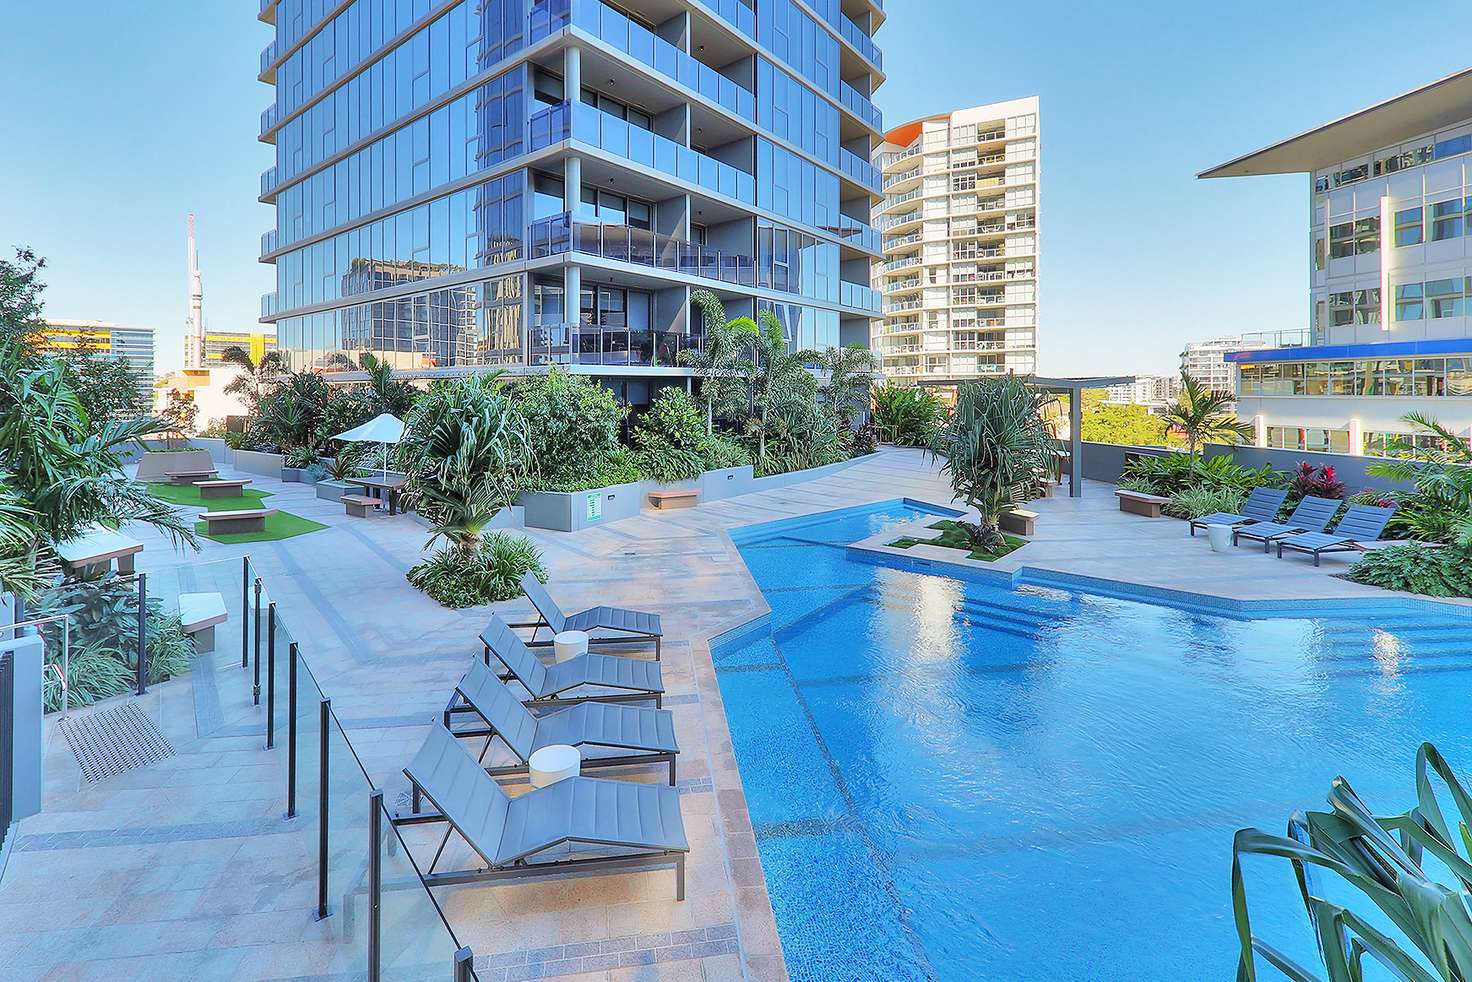 Main view of Homely apartment listing, 11603/1 Cordelia Street, South Brisbane QLD 4101